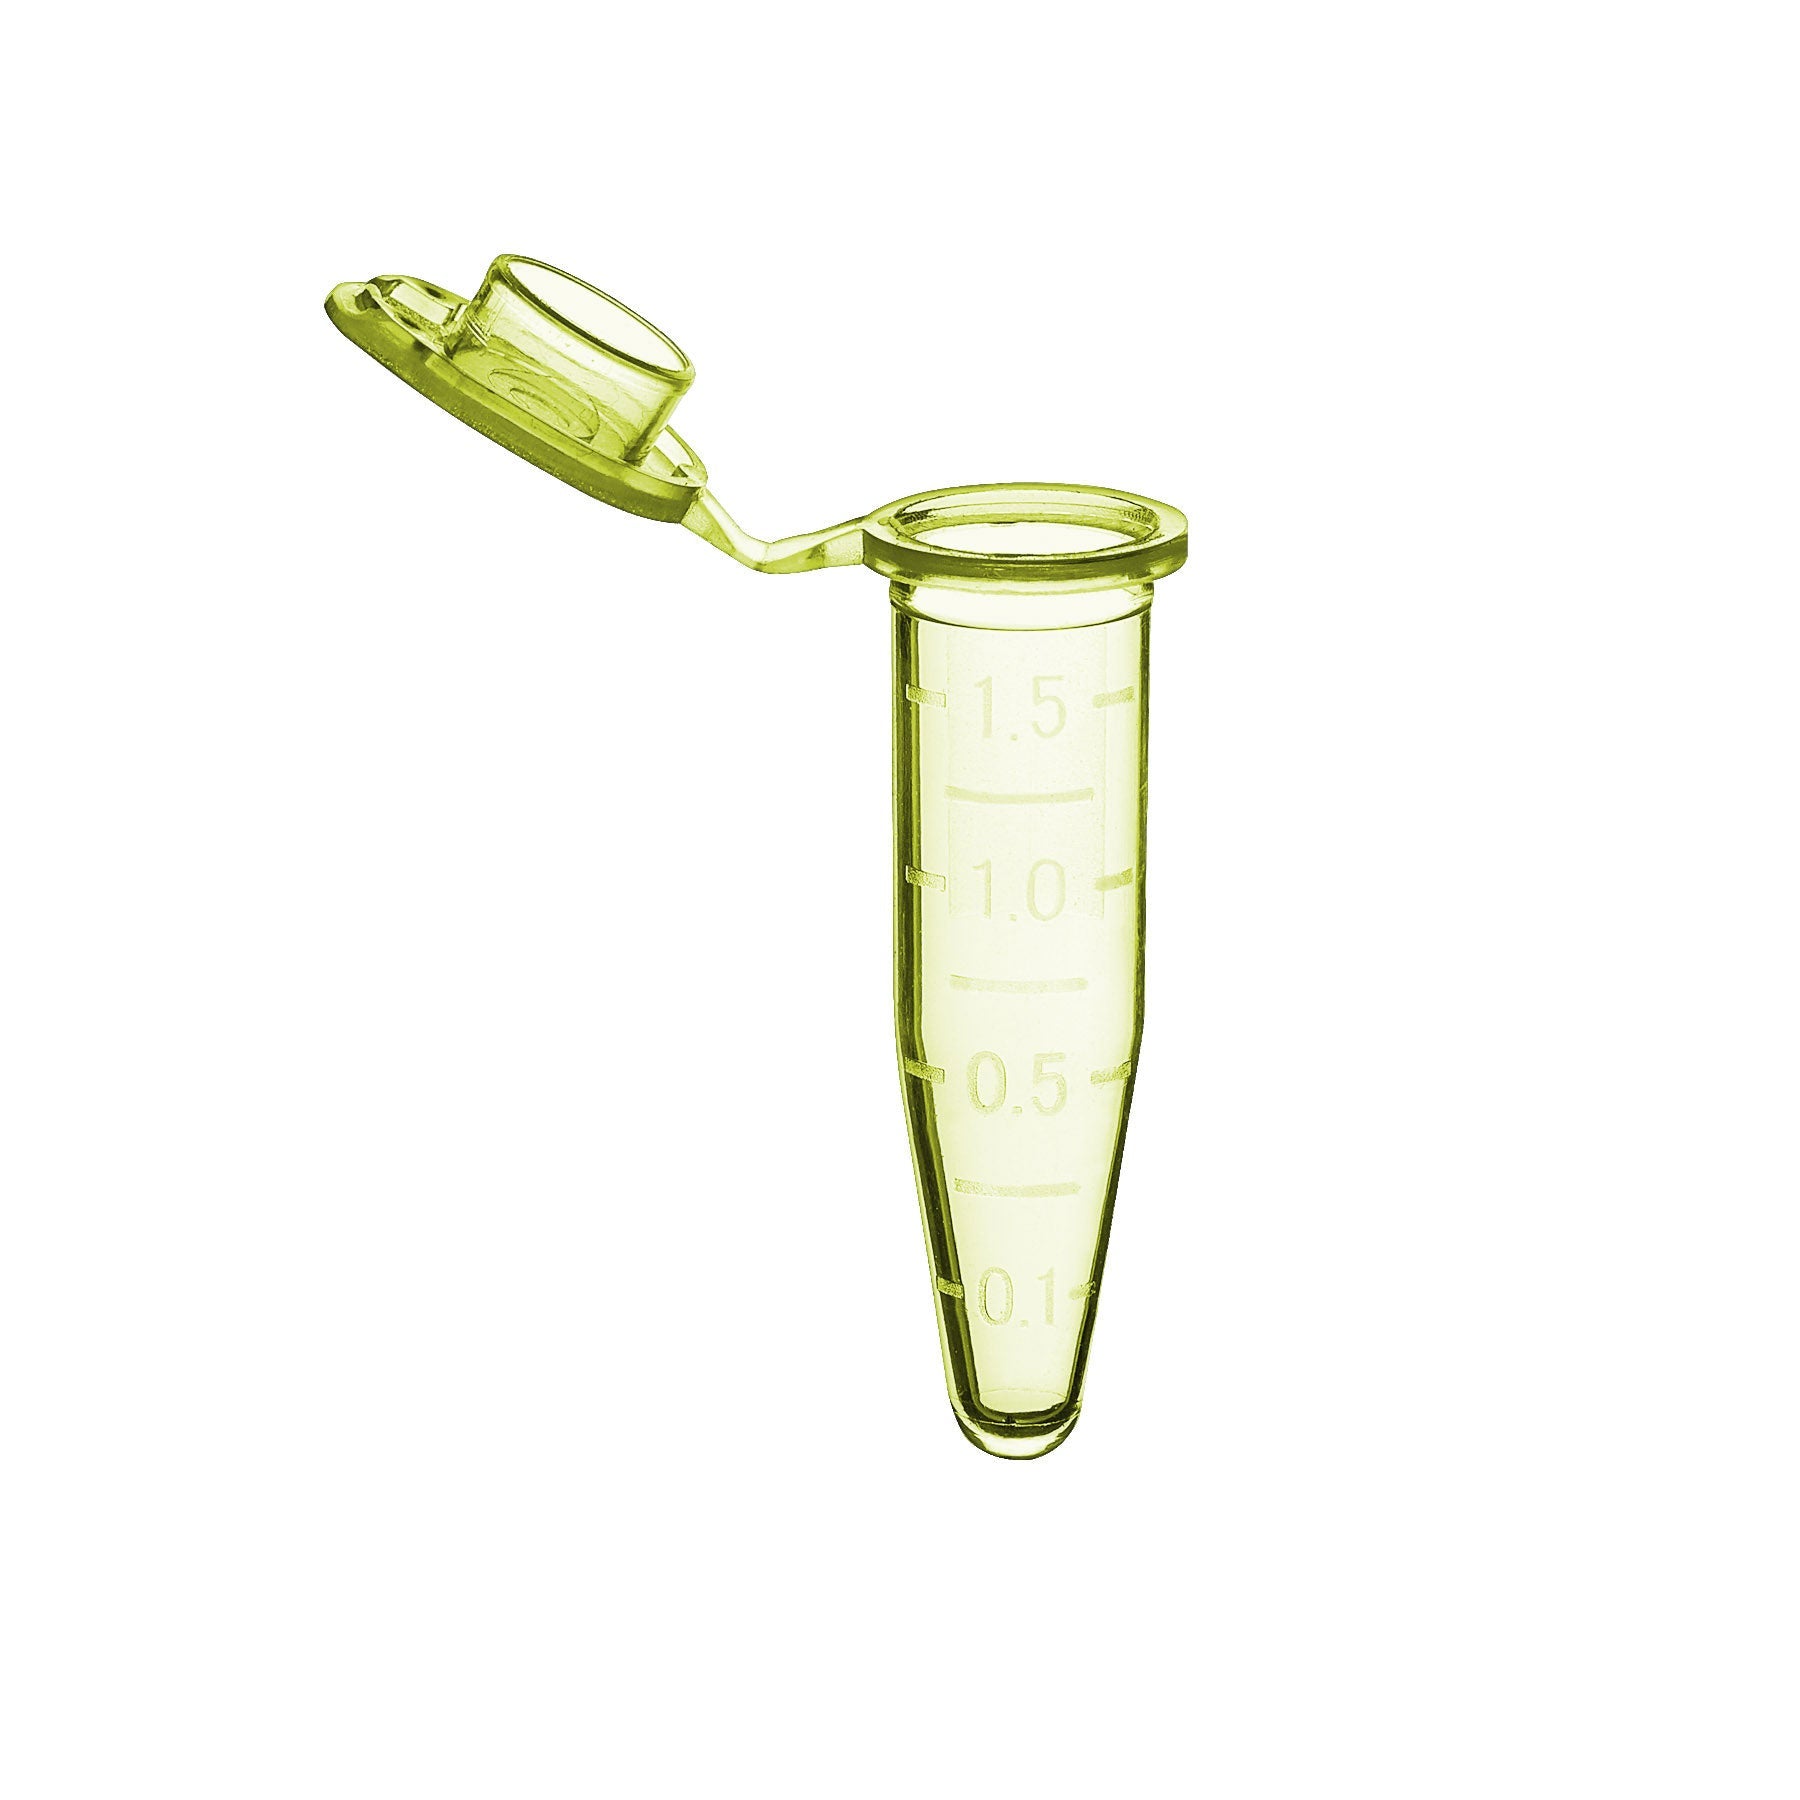 MTC Bio C2000-Y, SureSeal Microcentrifuge Tube with Cap, 1.5ml, Yellow, Sterile, with Self-Standing Bag & Stop-Pops, 500/pk